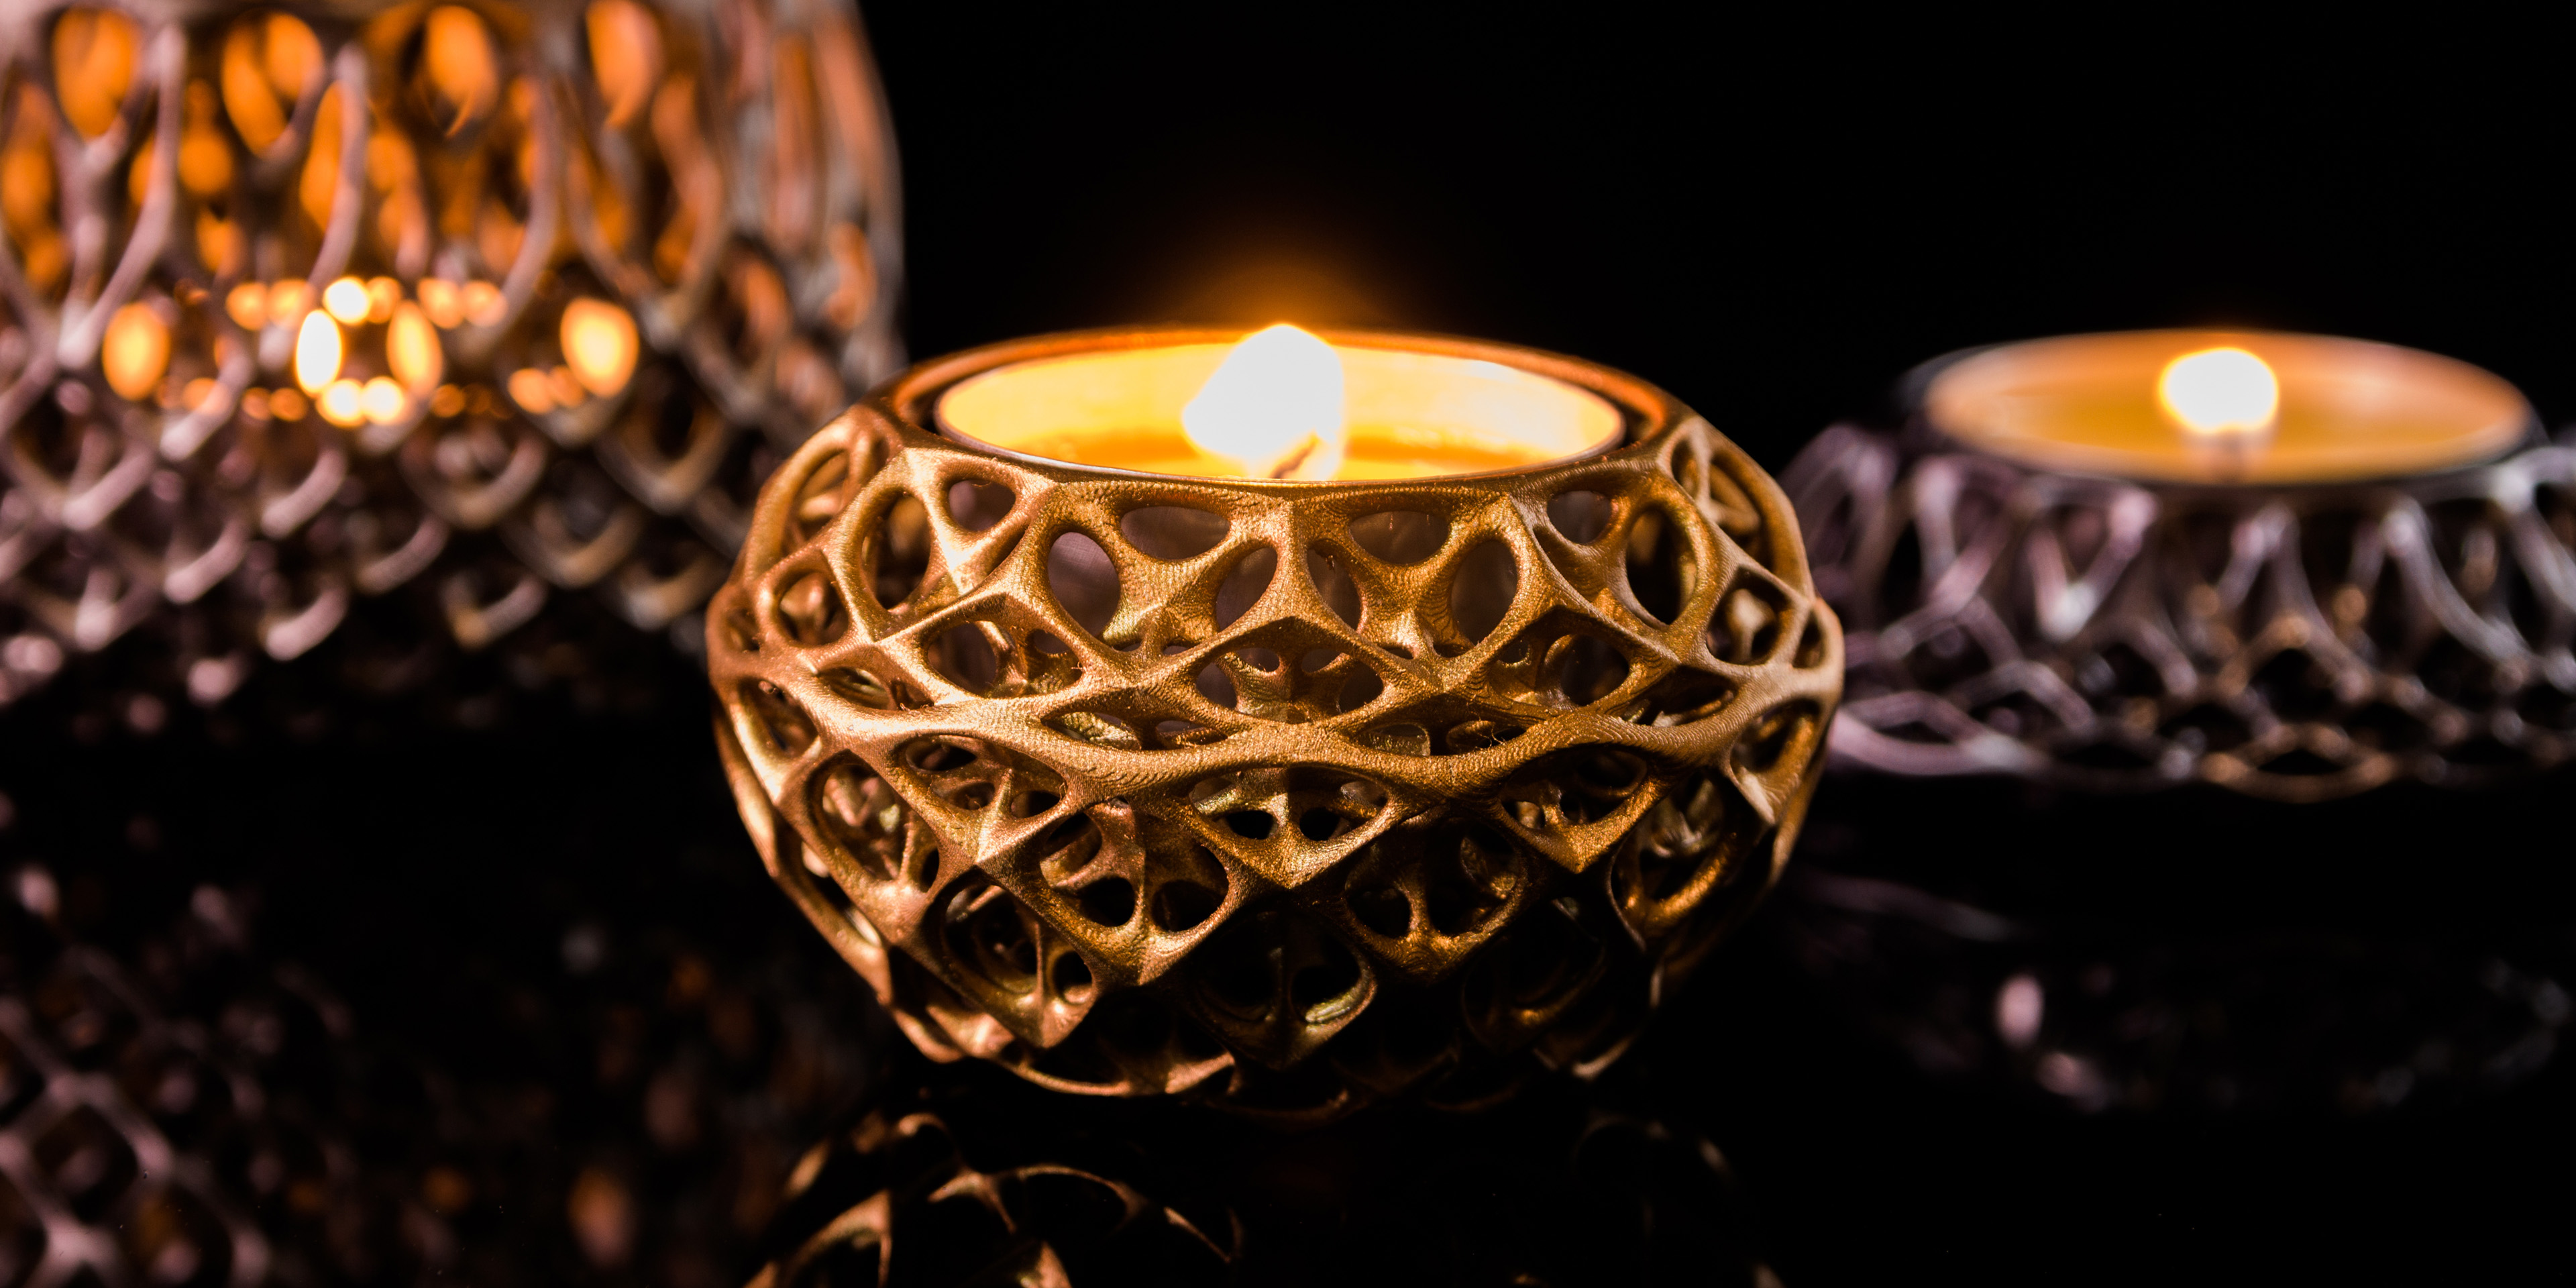 Find here a selection of the best 3D models of 3D printable files of candle holders